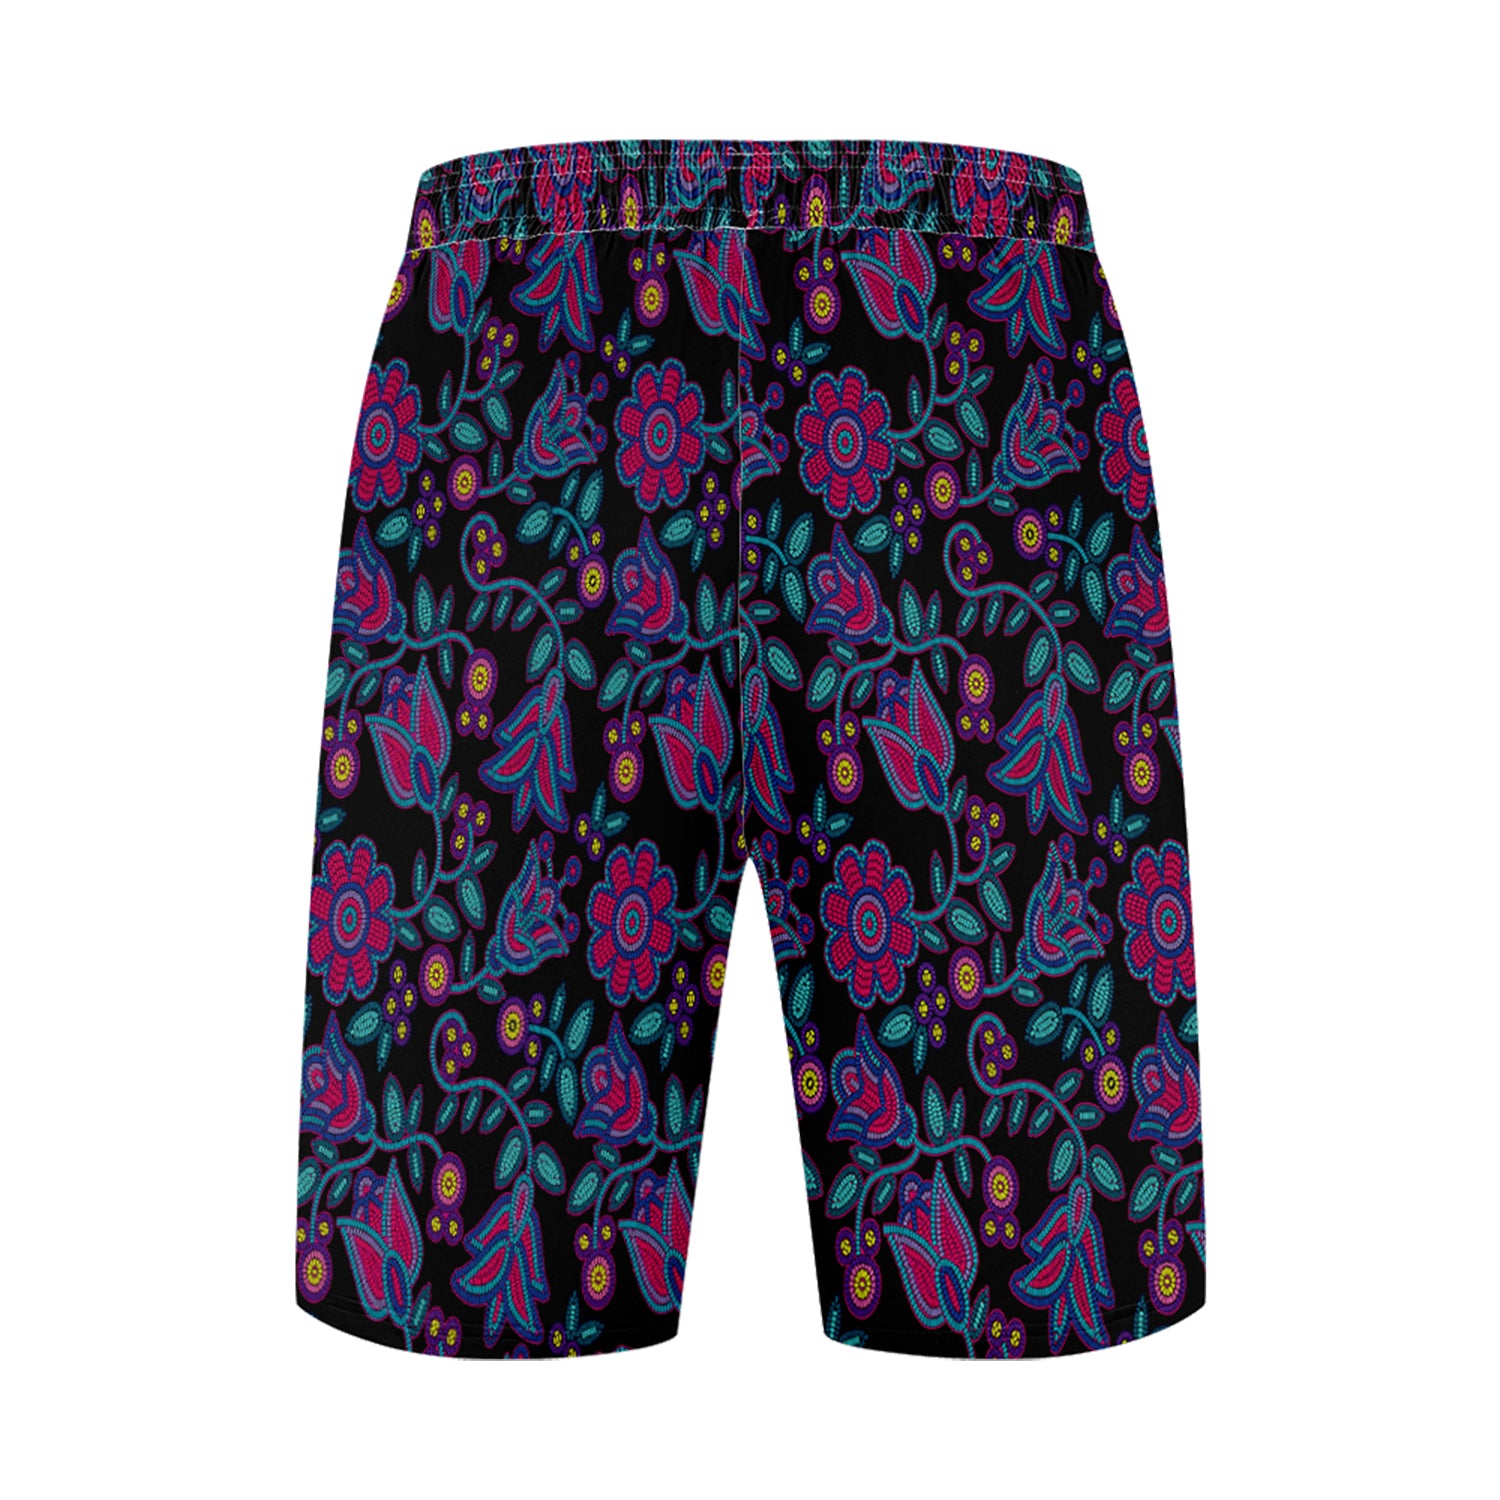 Beaded Nouveau Coal Athletic Shorts with Pockets